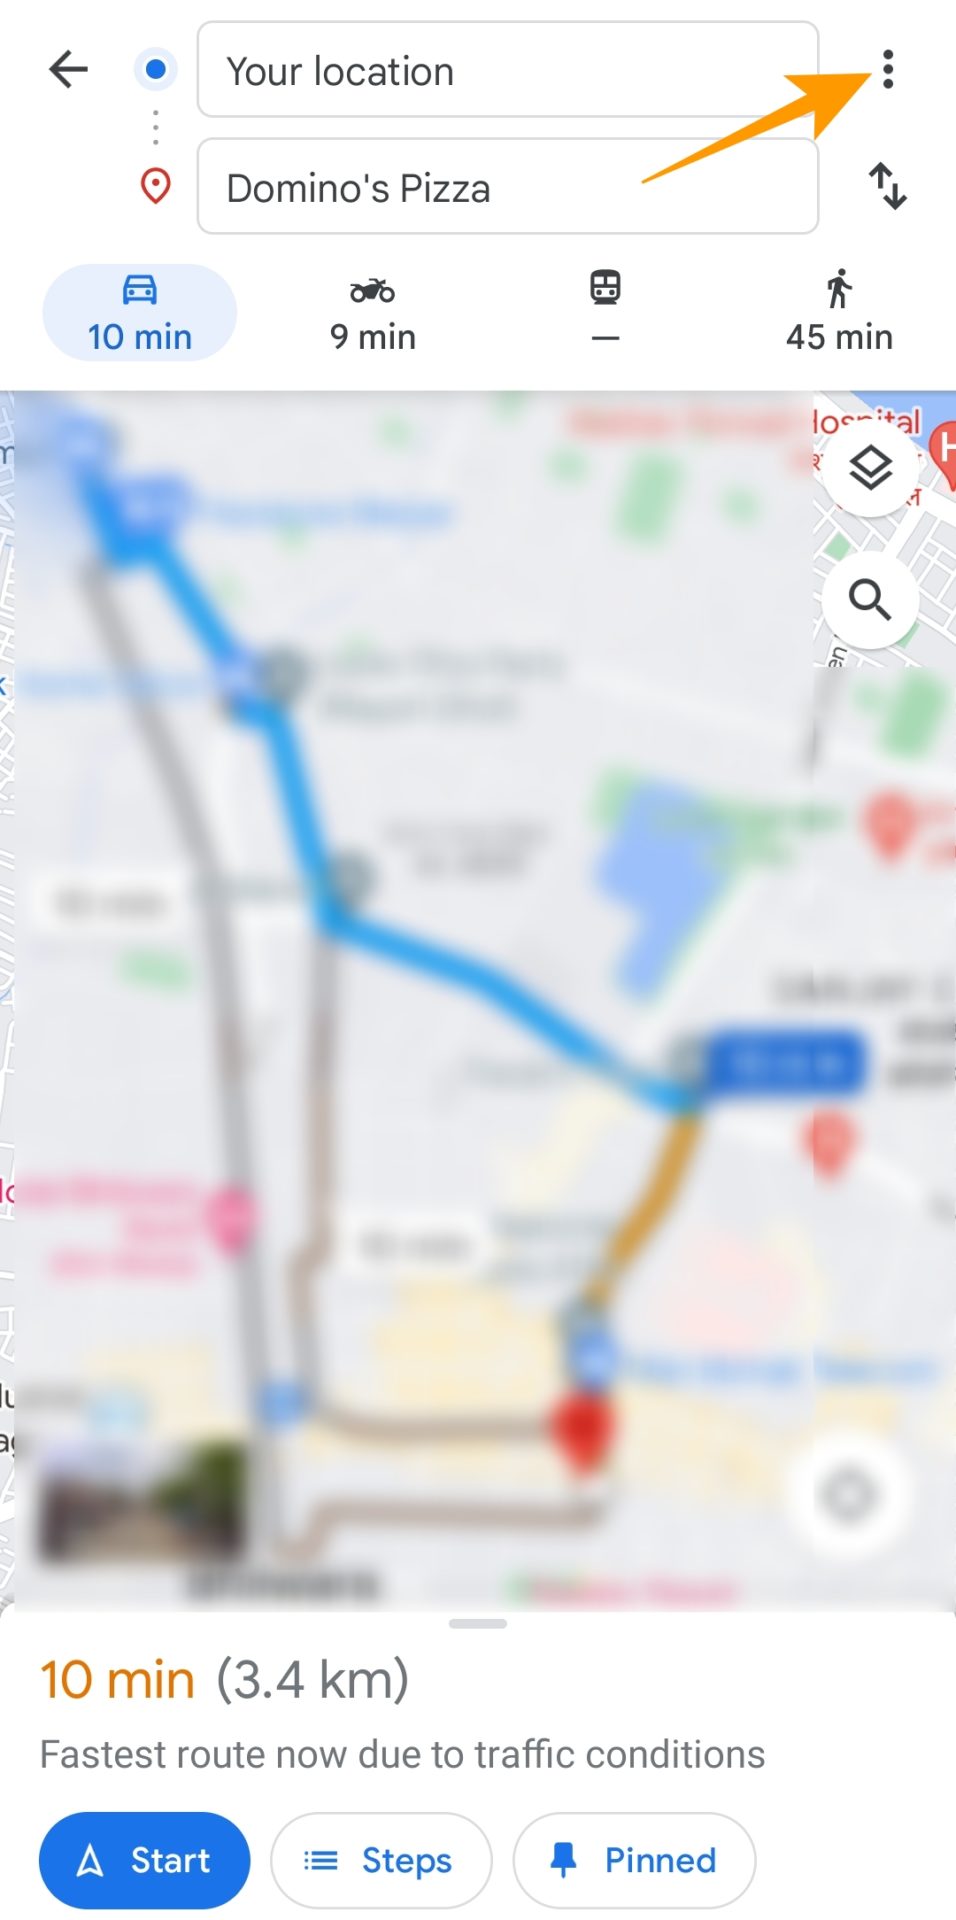 Pinned route on Google Maps